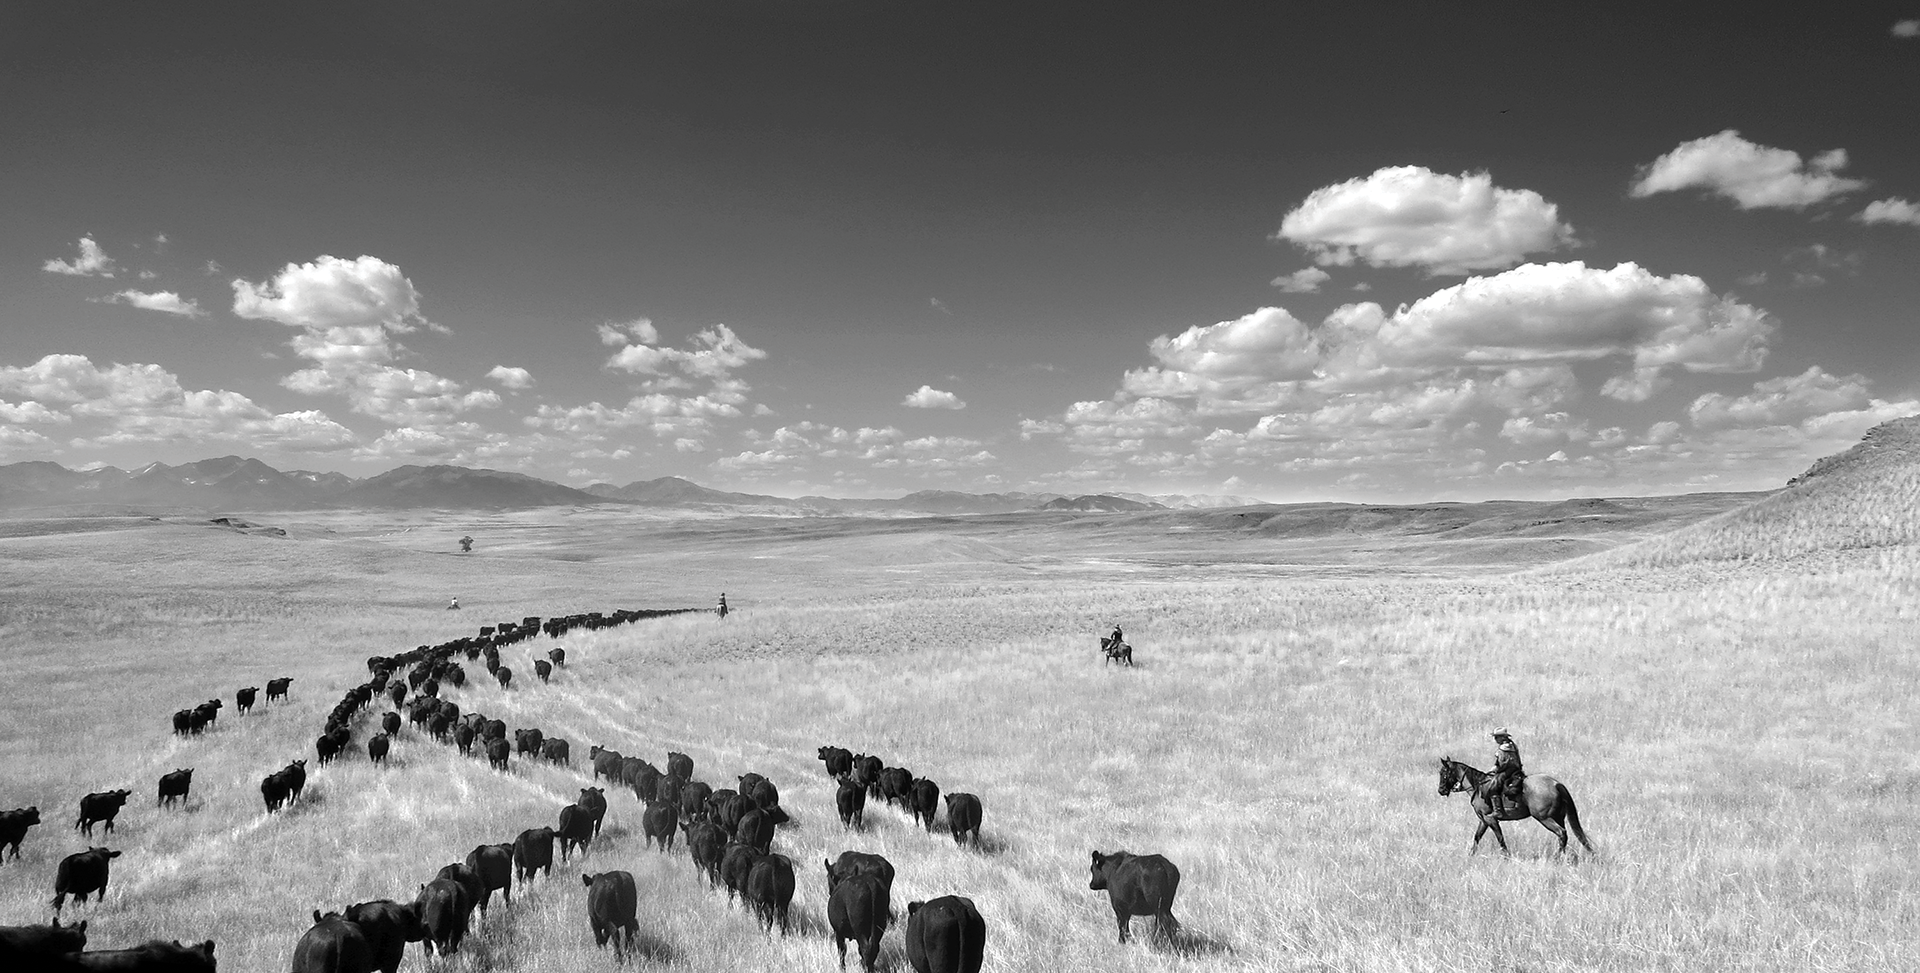 A long line of black cows winds into the distance across a broad grass valley. One cowboy on a horse rides toward the line from the right.